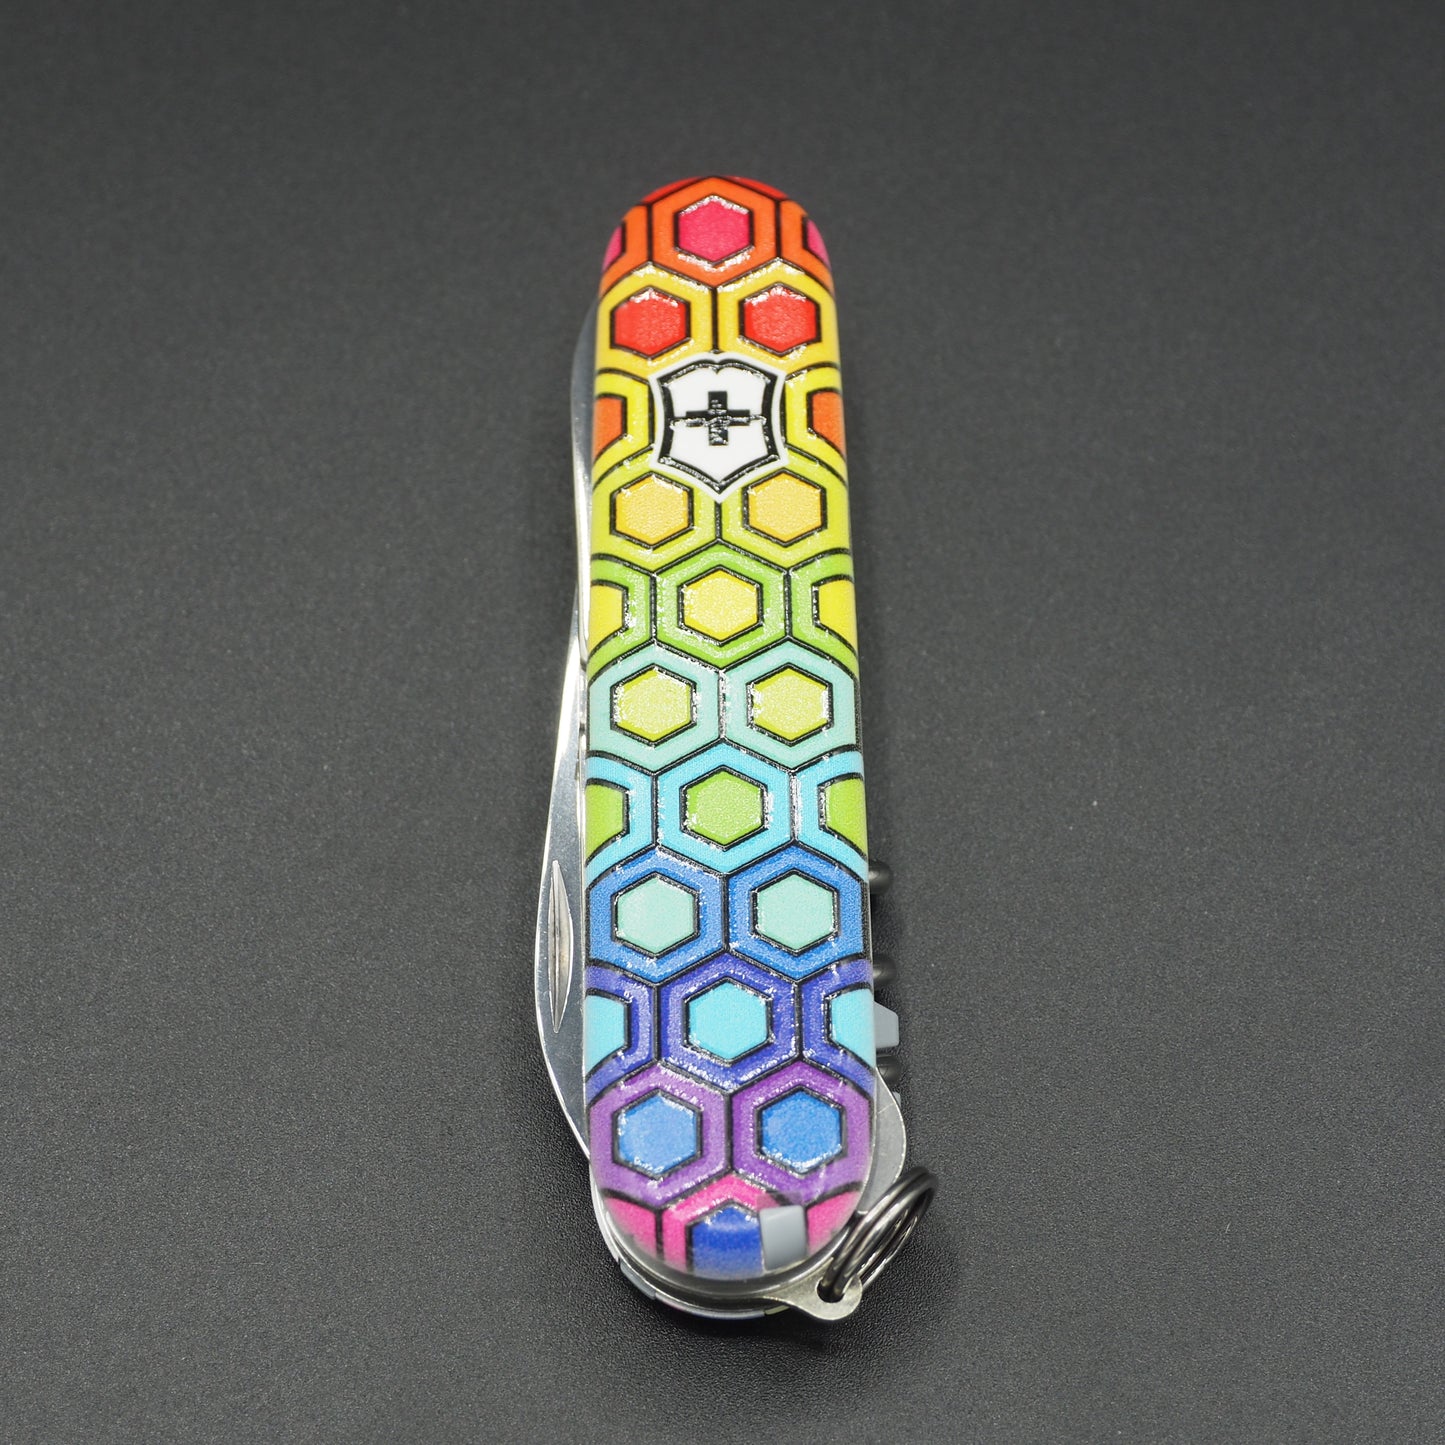 Victorinox Compact "The Color 2" 3D The Sharp Knife Club Edition